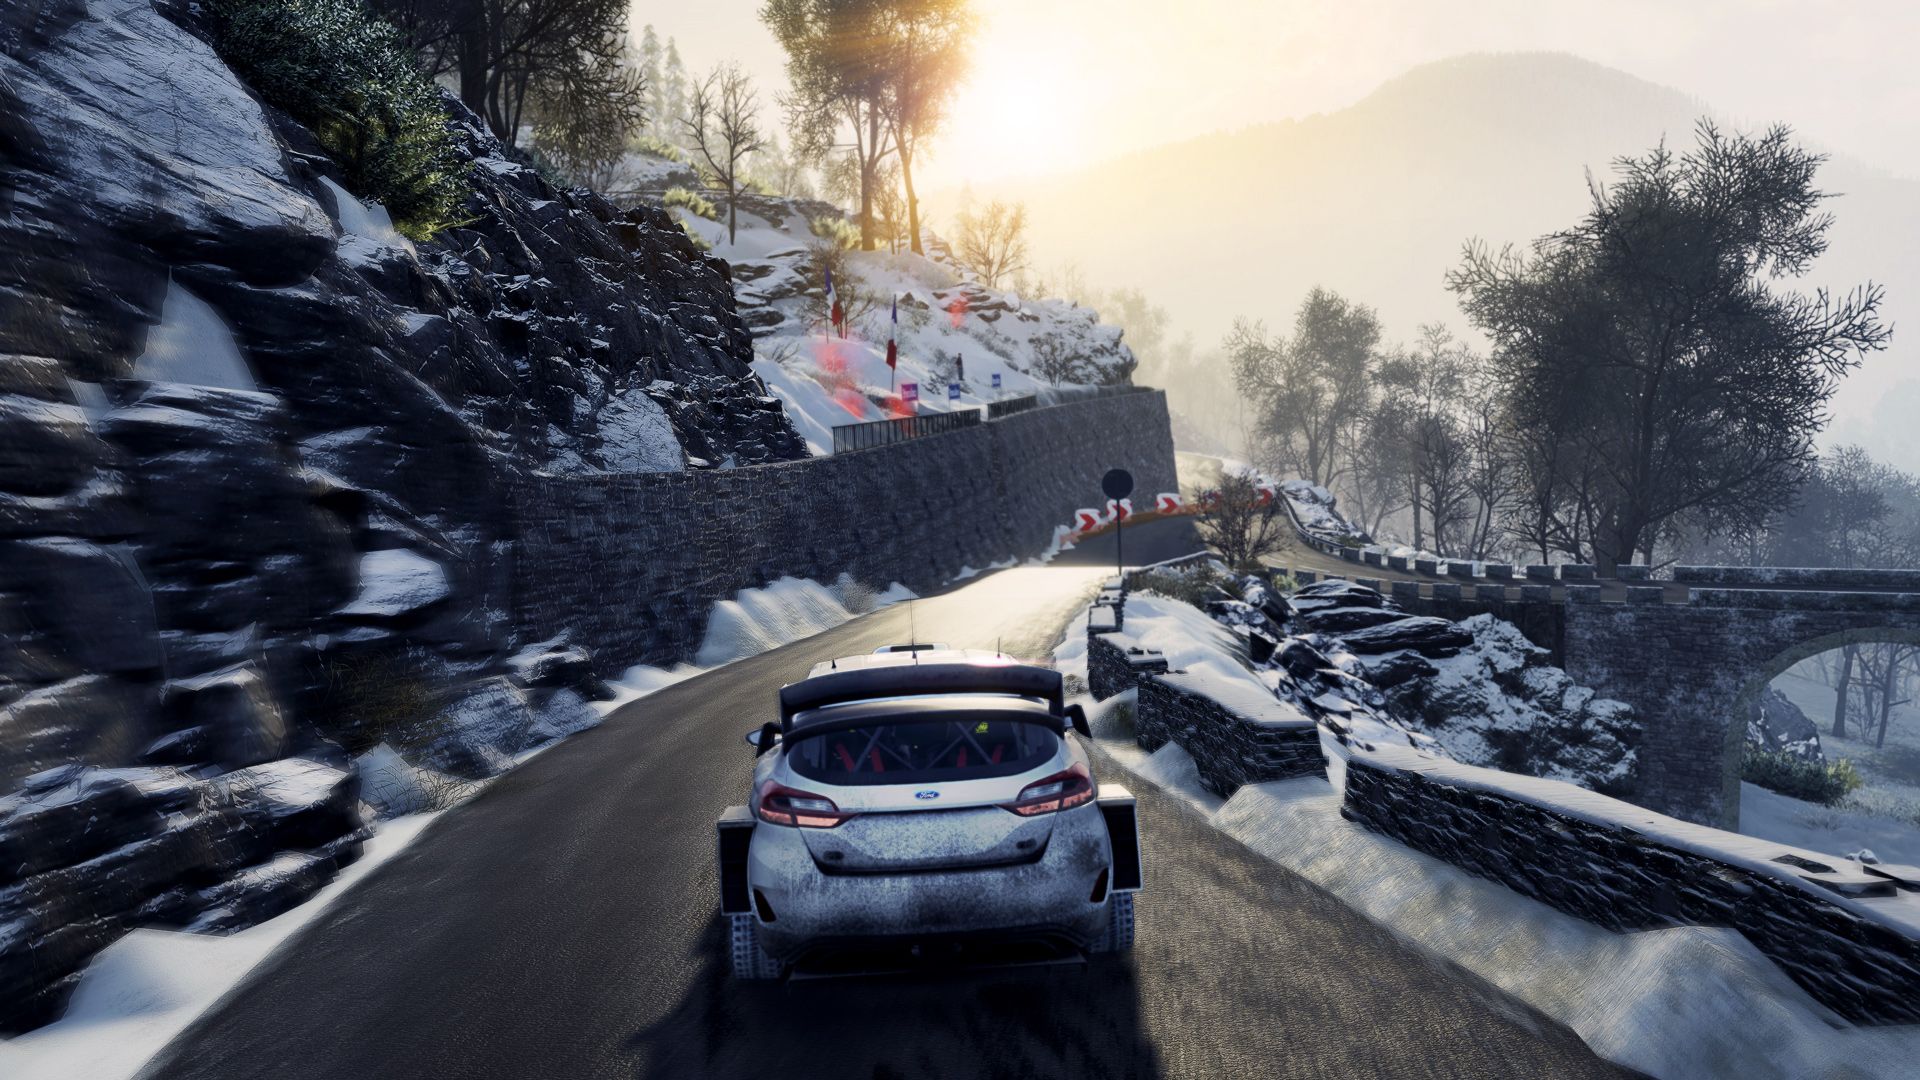 download wrc 8 online for free